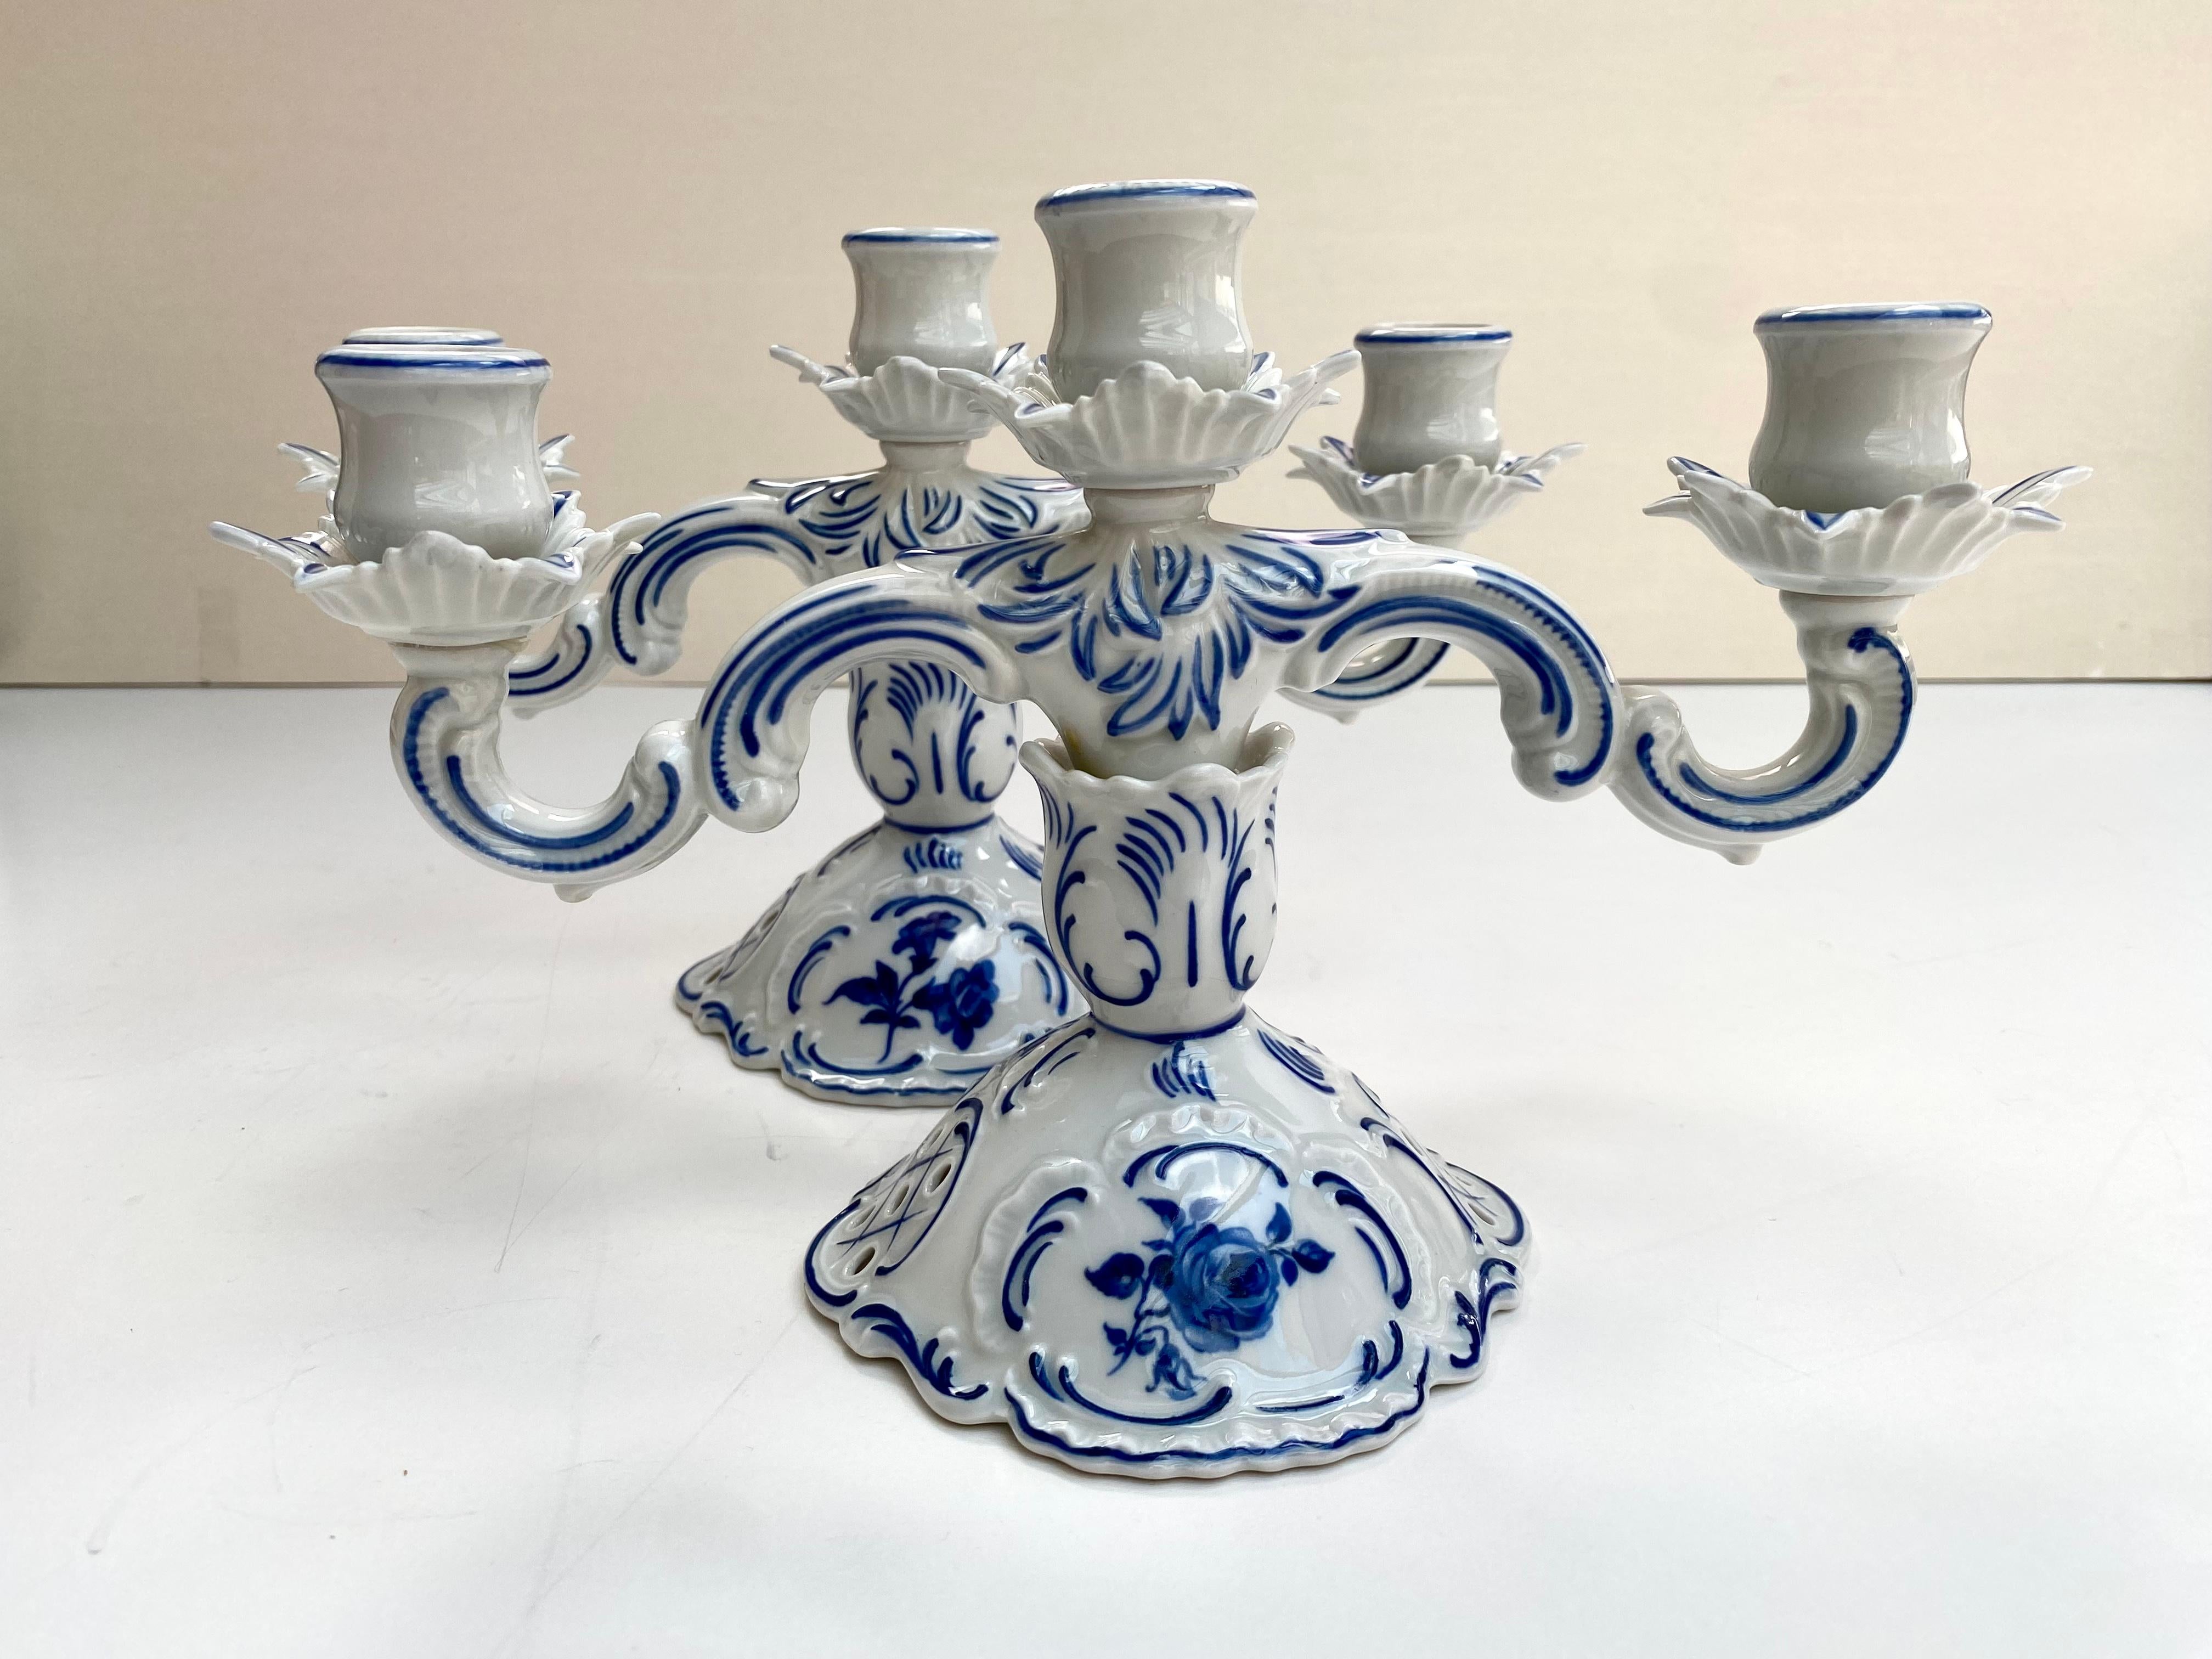 Early 20th Century Antique Paired Candleholders, Dresden, Germany Porcelain Candelabra